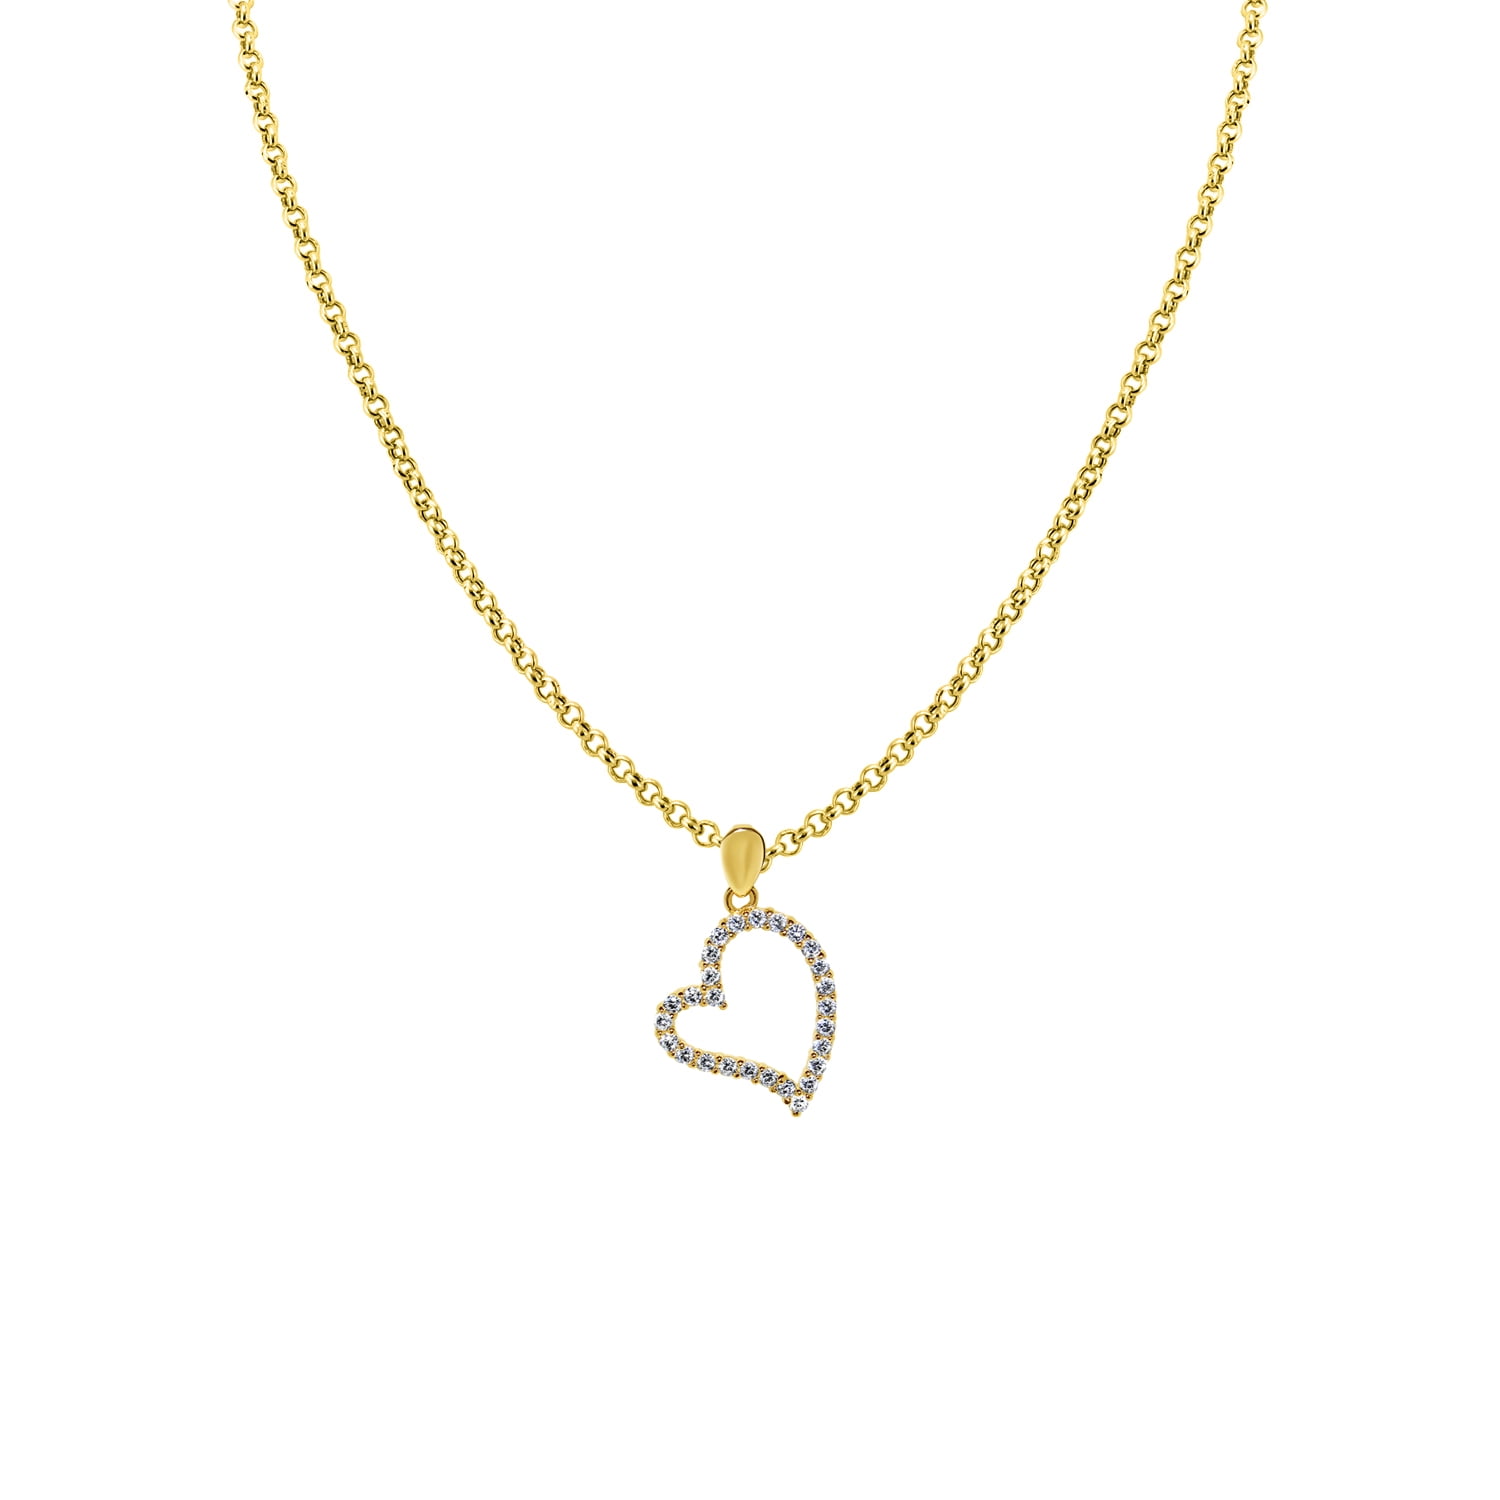 The World Jewelry Center 14k Yellow Gold Open Heart CZ Pendant with 1.2mm Cable Chain Necklace